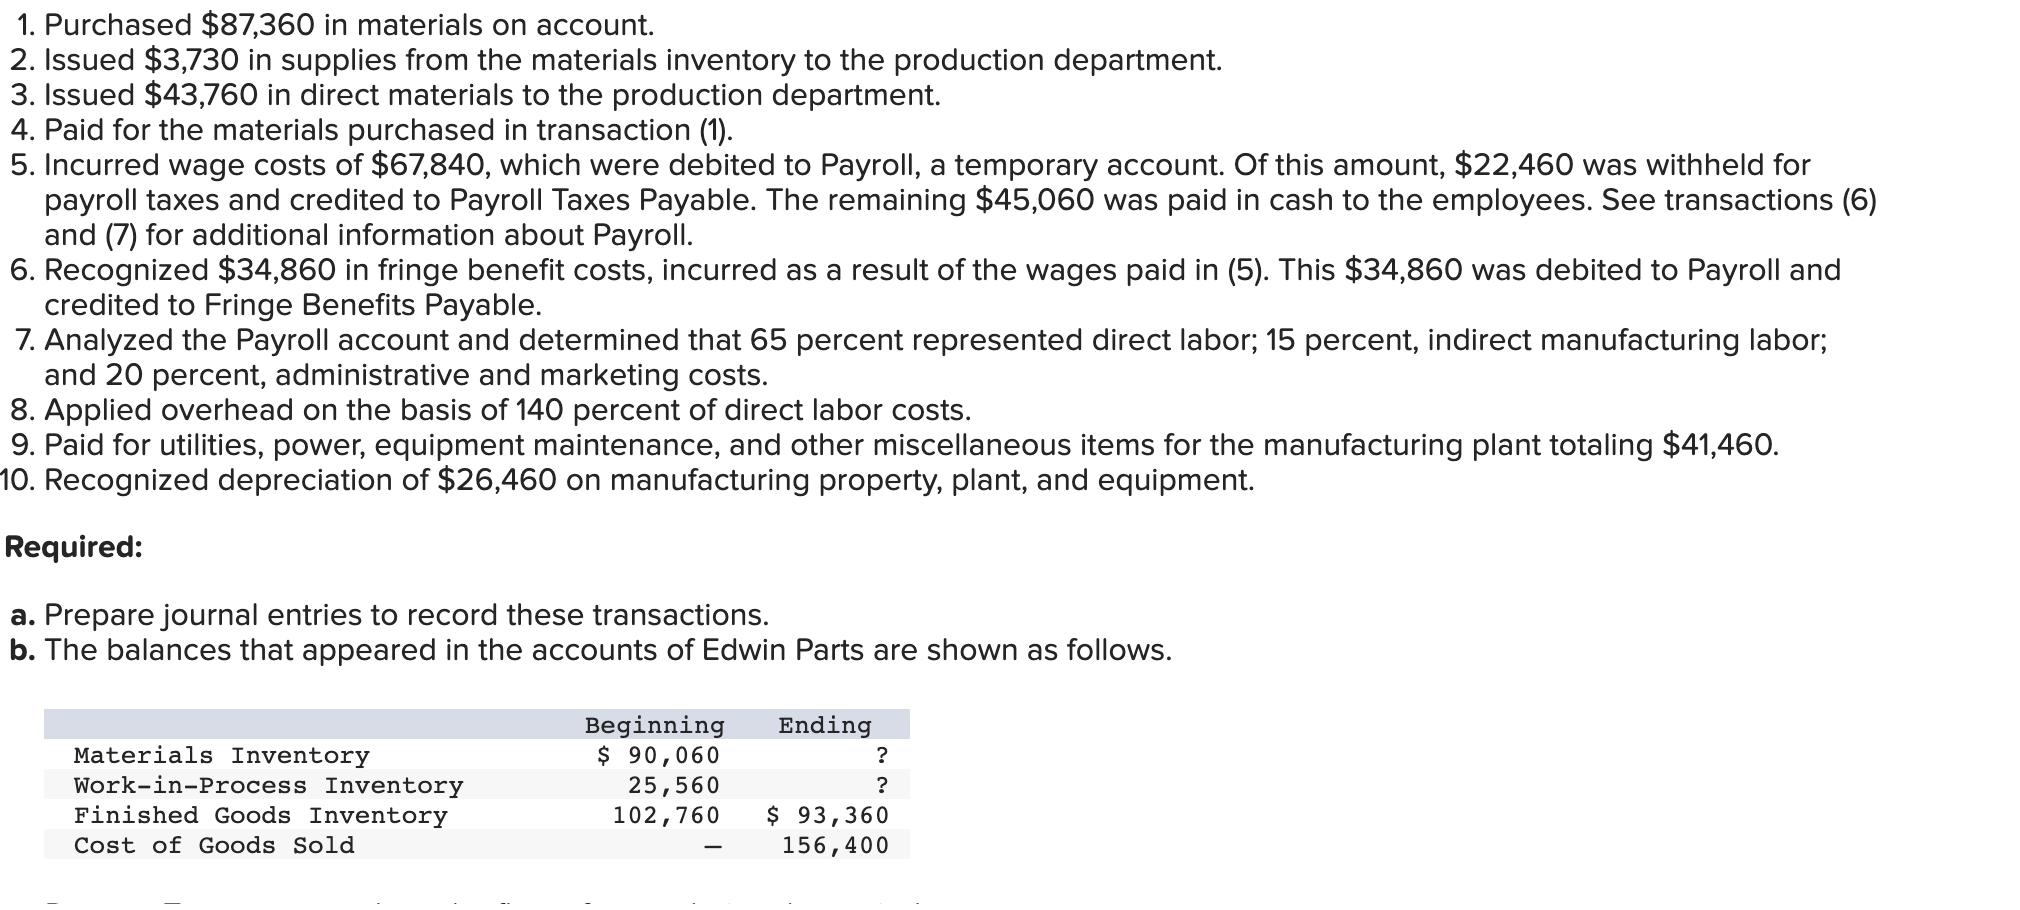 1. Purchased $87,360 in materials on account. 2. Issued $3,730 in supplies from the materials inventory to